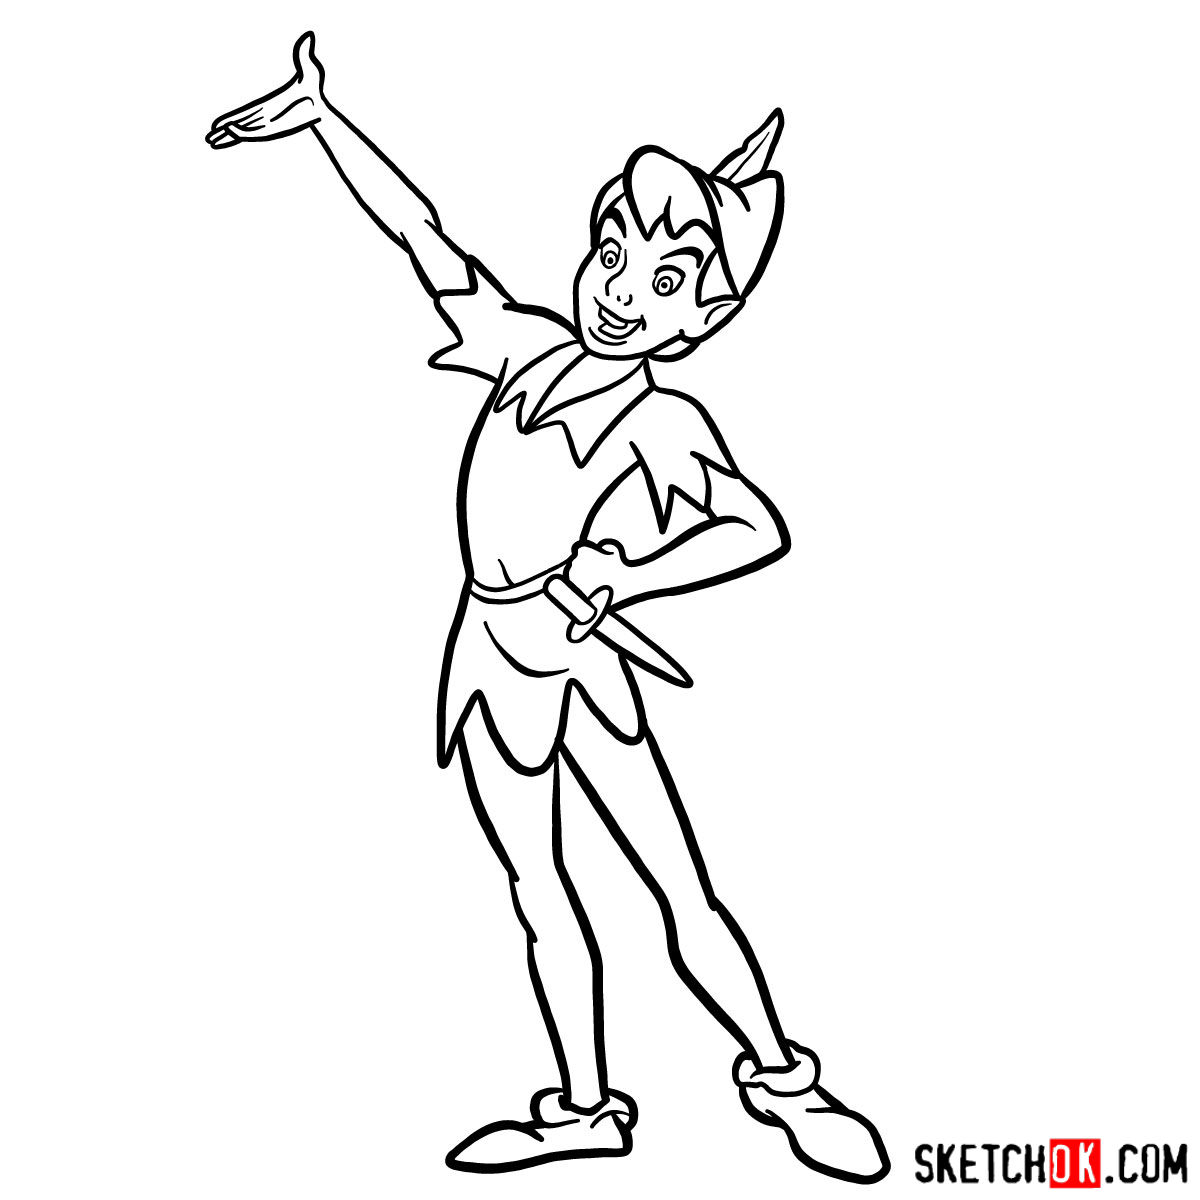 How to draw Peter Pan - step 11